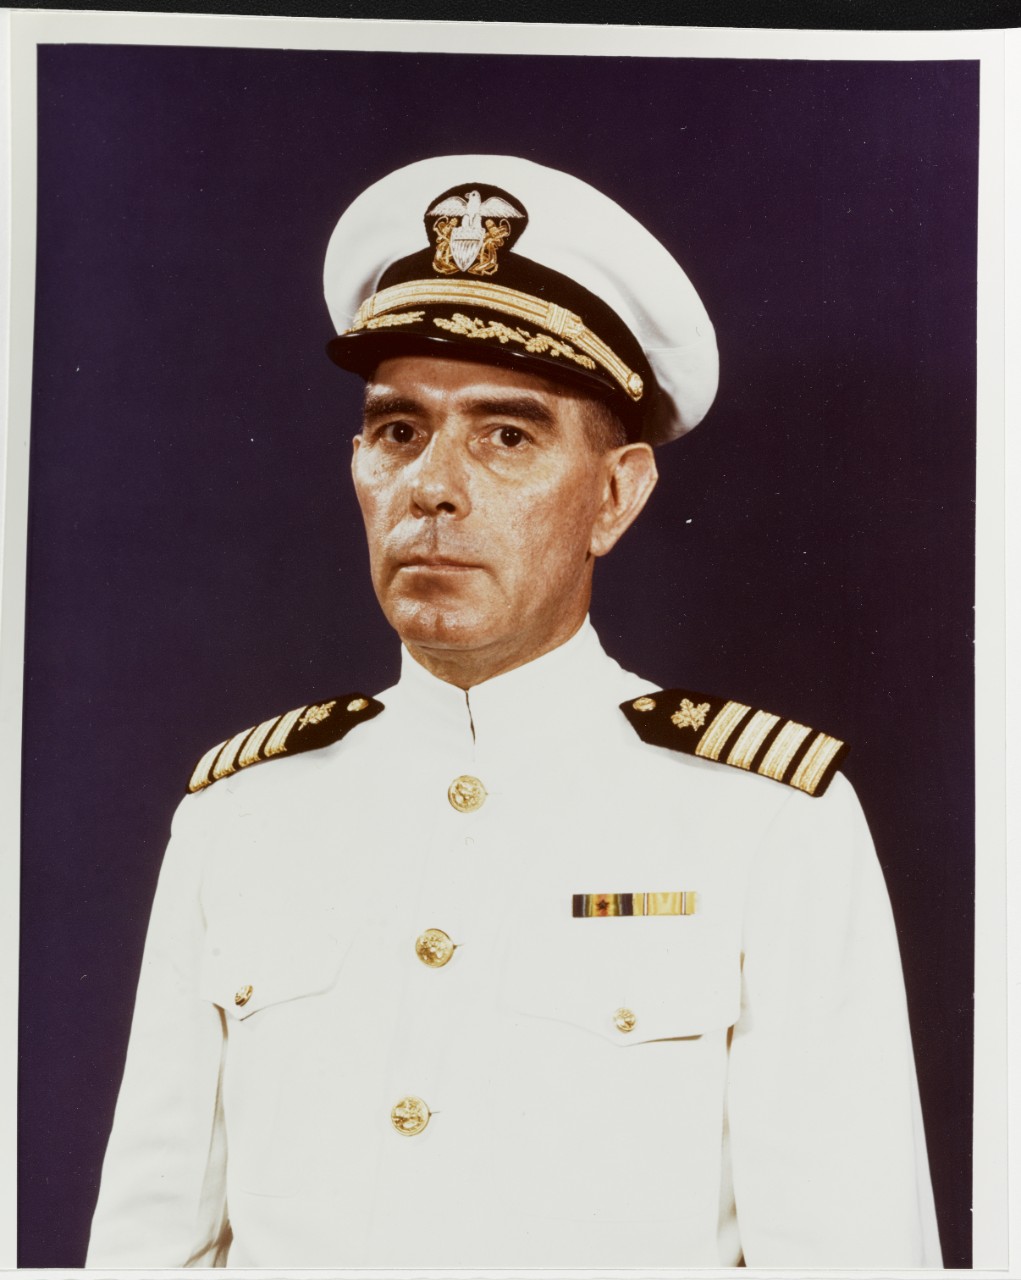 Captain William J. Carter, USN (Supply Corps)